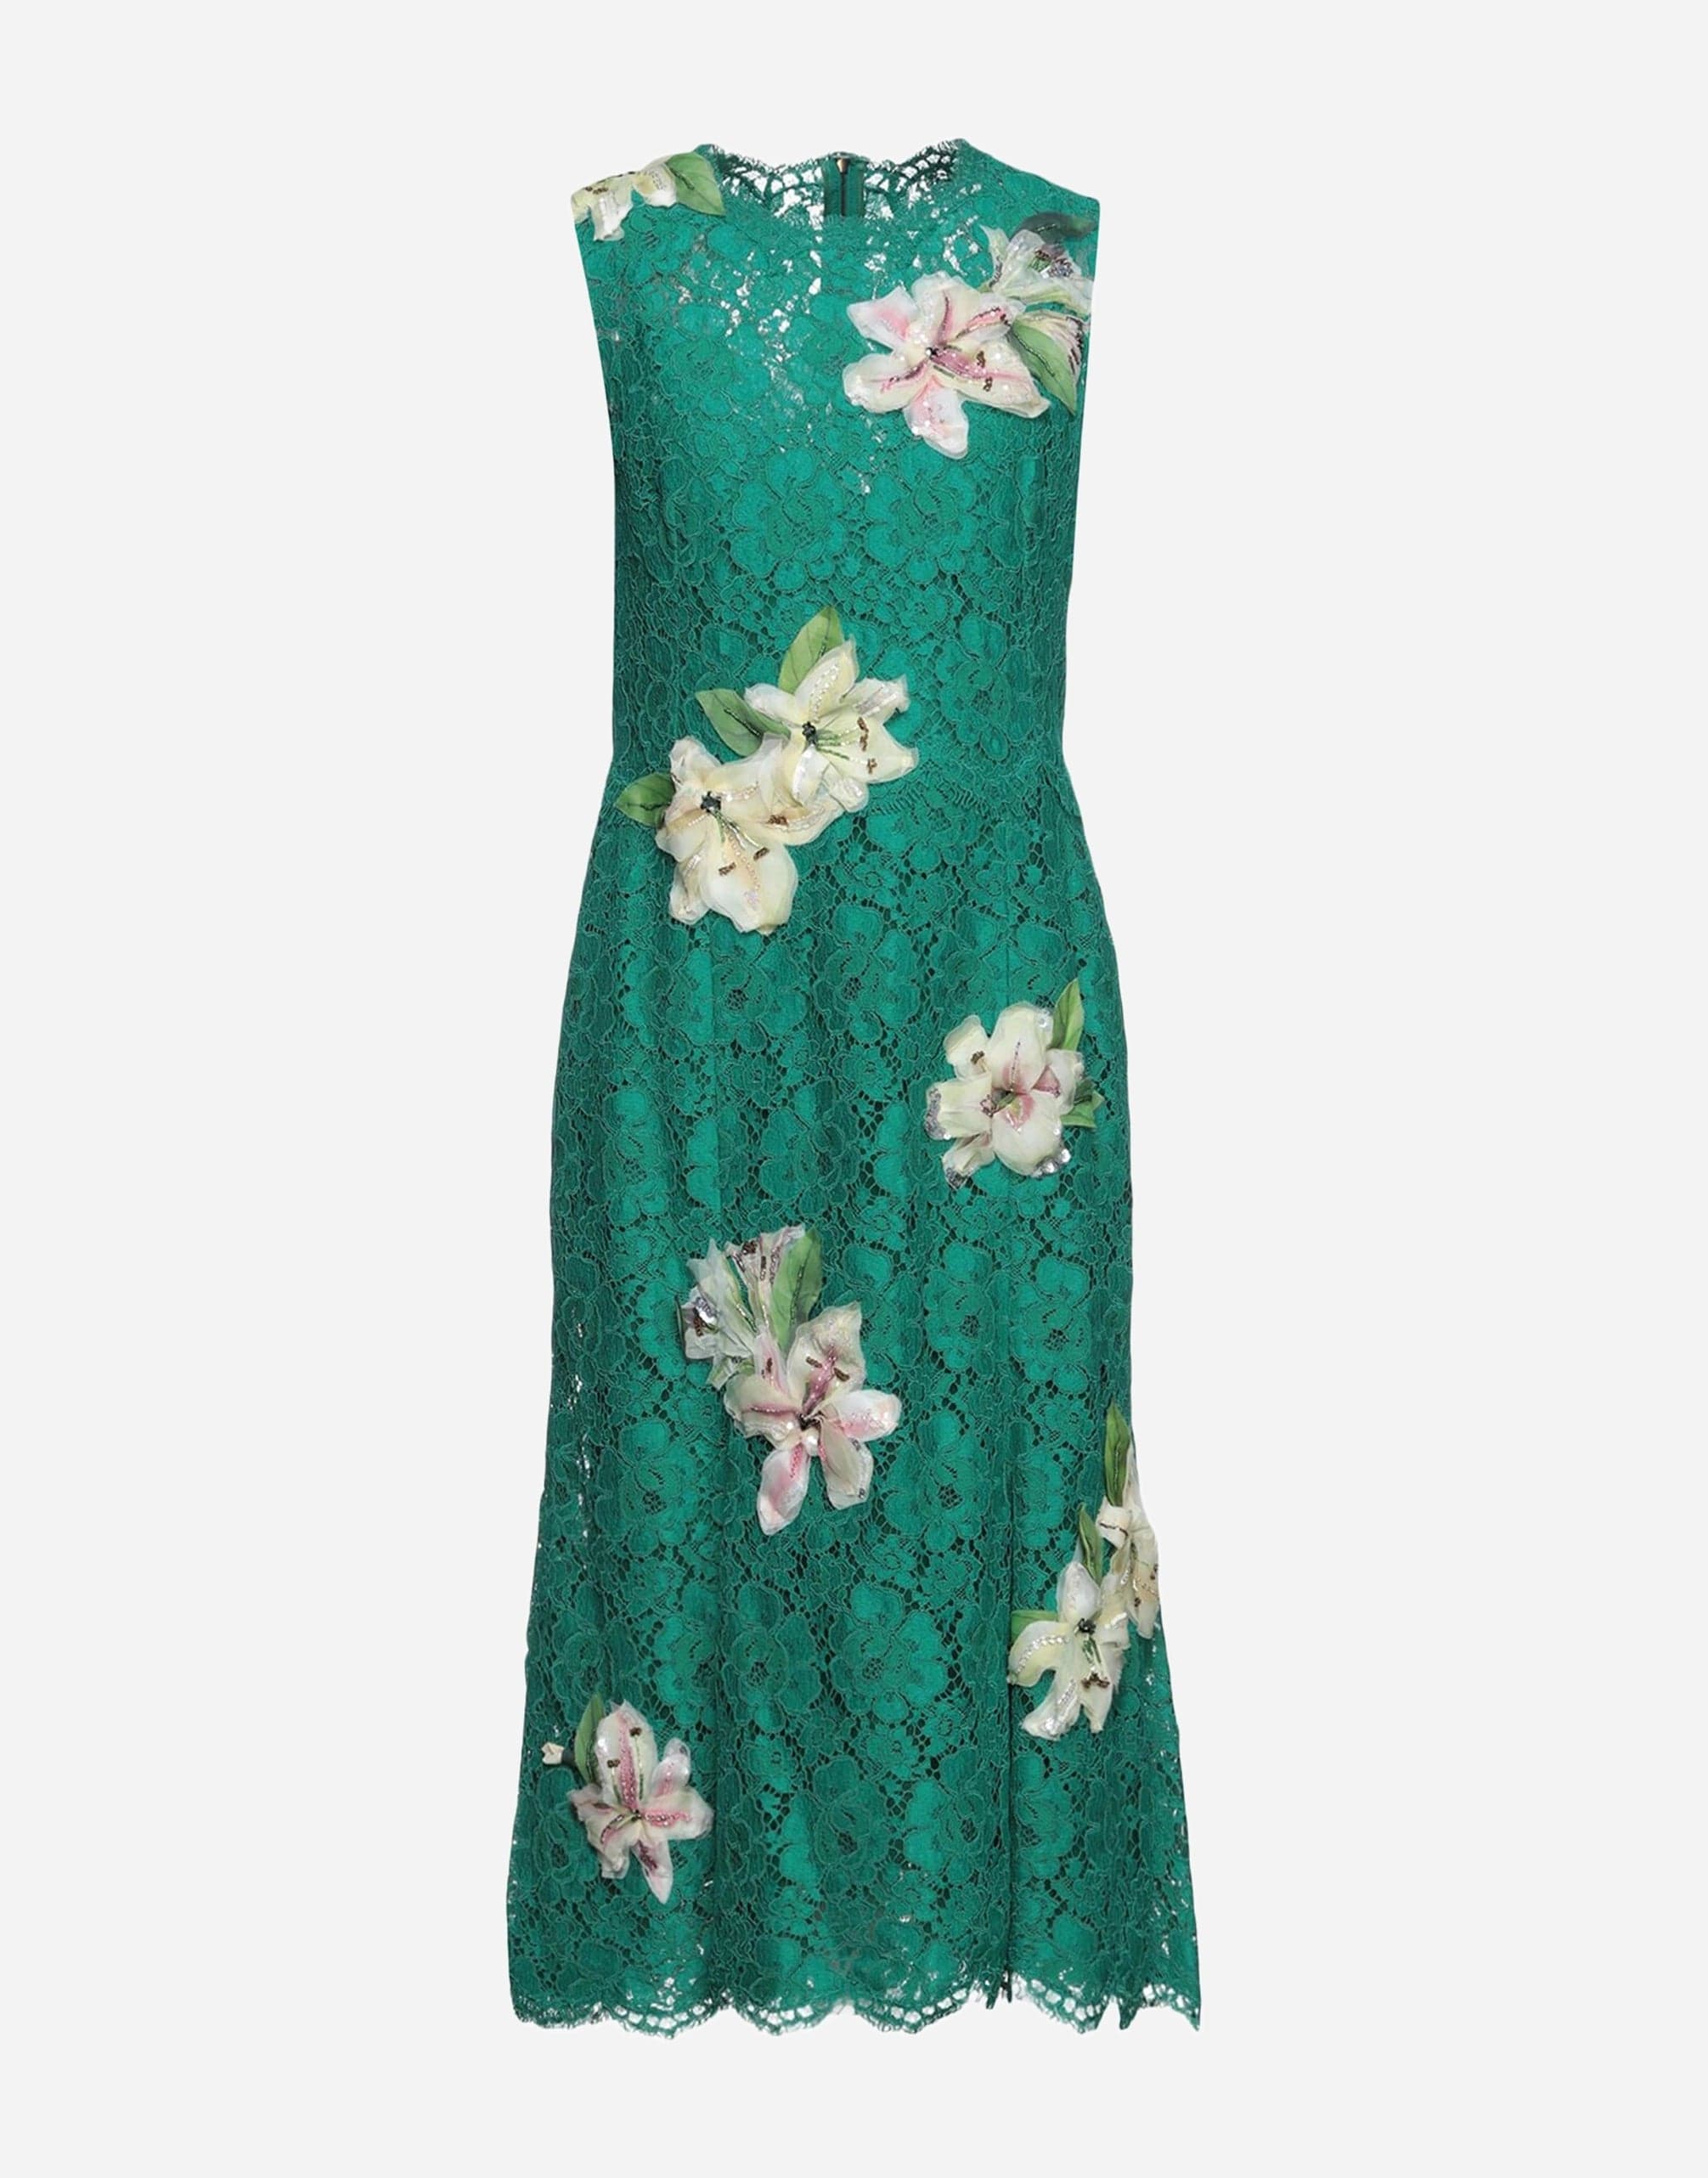 Dolce & Gabbana Lace Floral Appliqued Sleeveless Dress